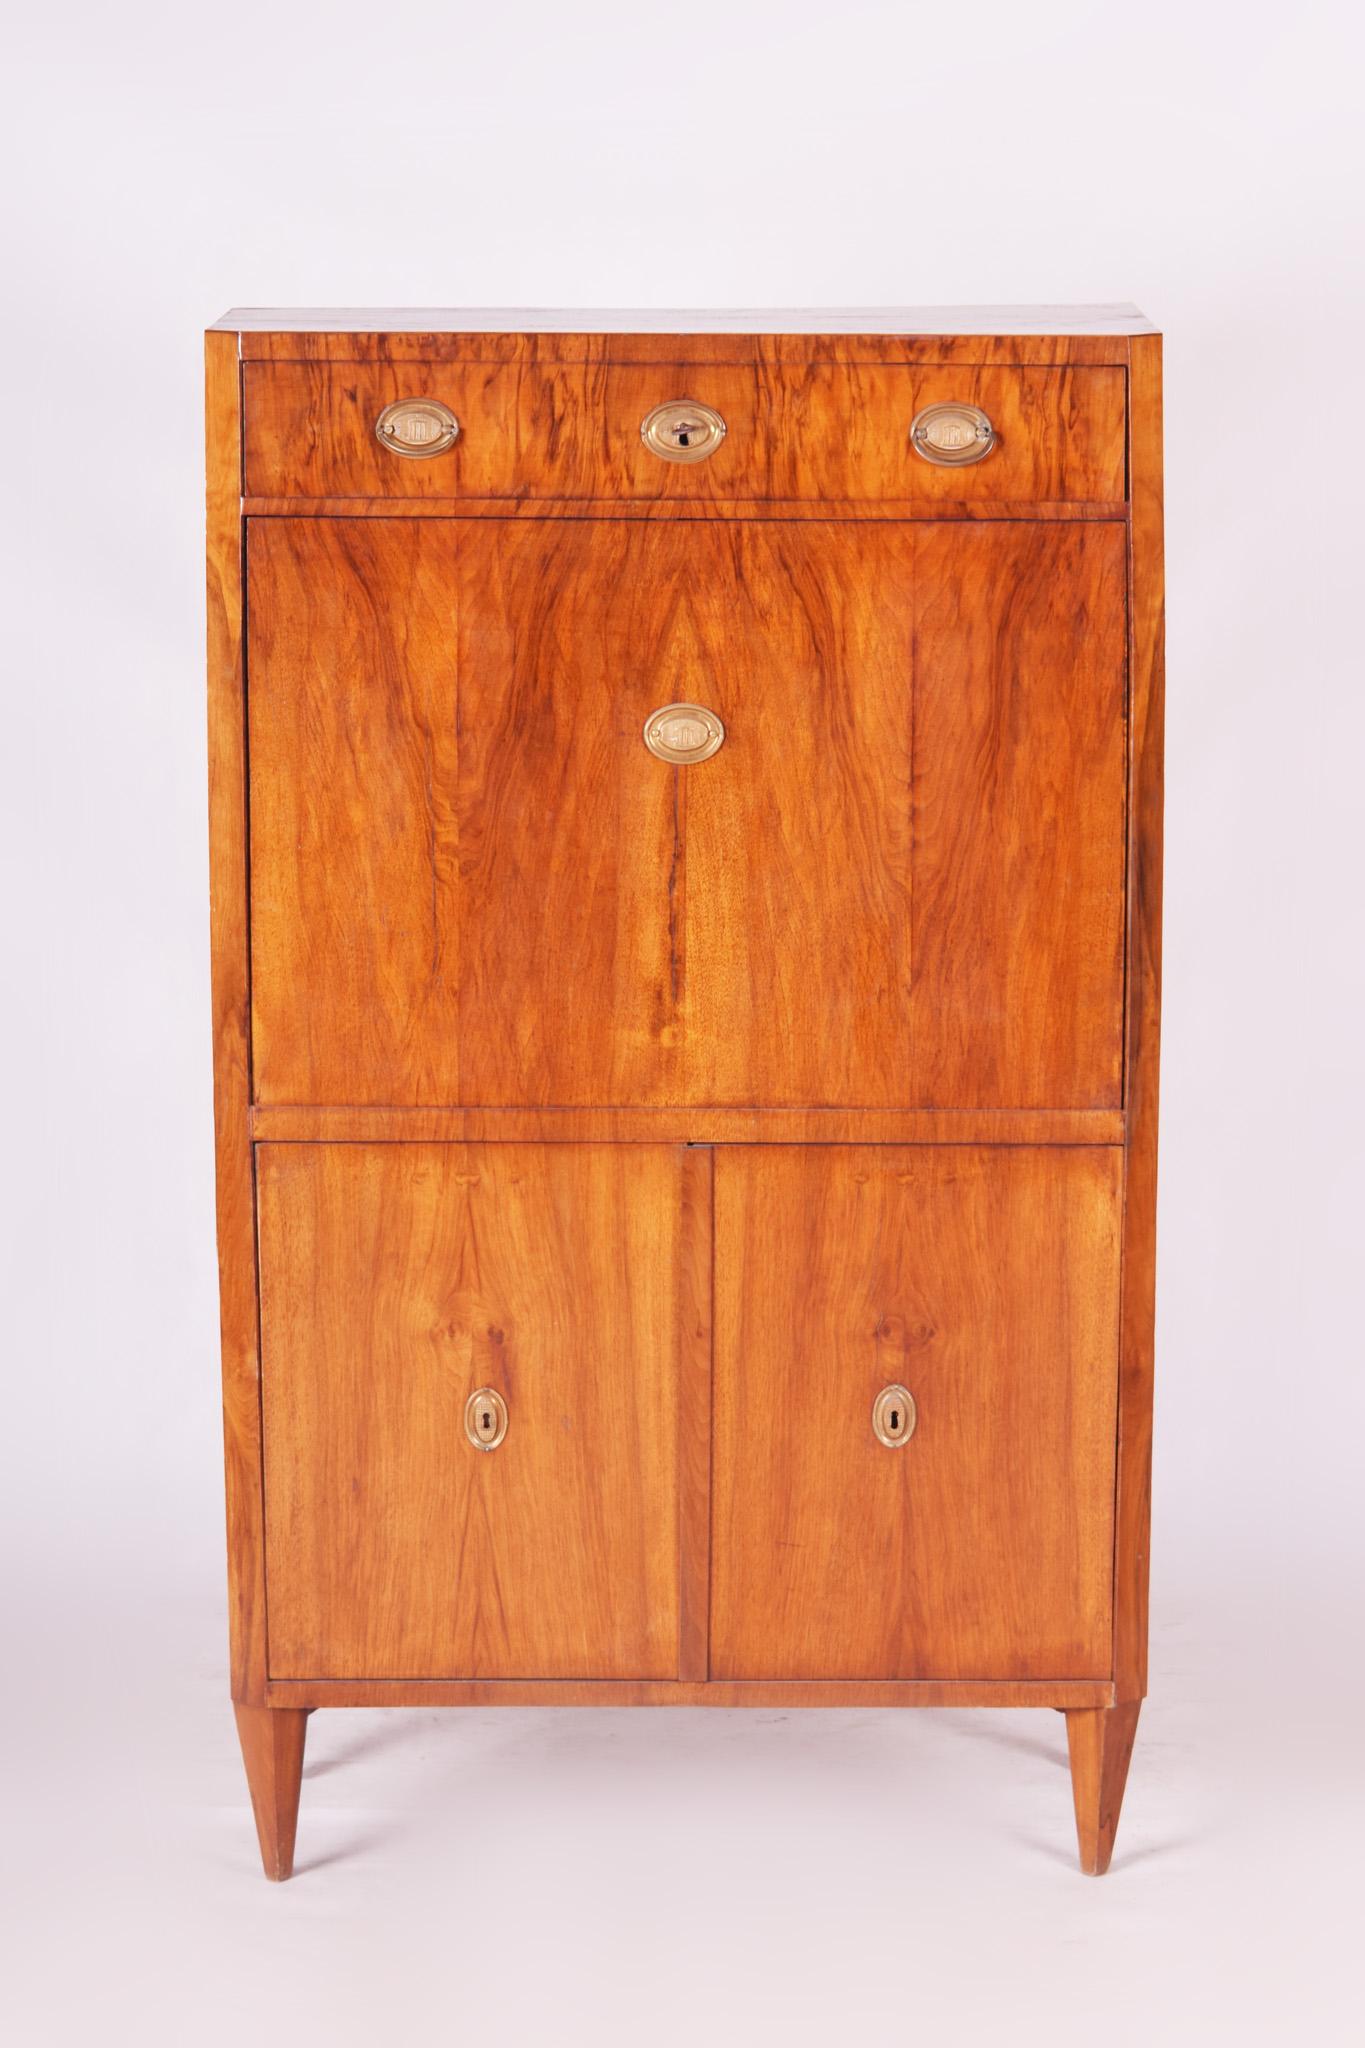 Shipping to any US port only for $290 USD

Biedermeier secretary and writing desk, (Cylinder)
Material: Walnut
Completely restored, Shellac polish.
Period: 1830-1839
Source: Czechia.